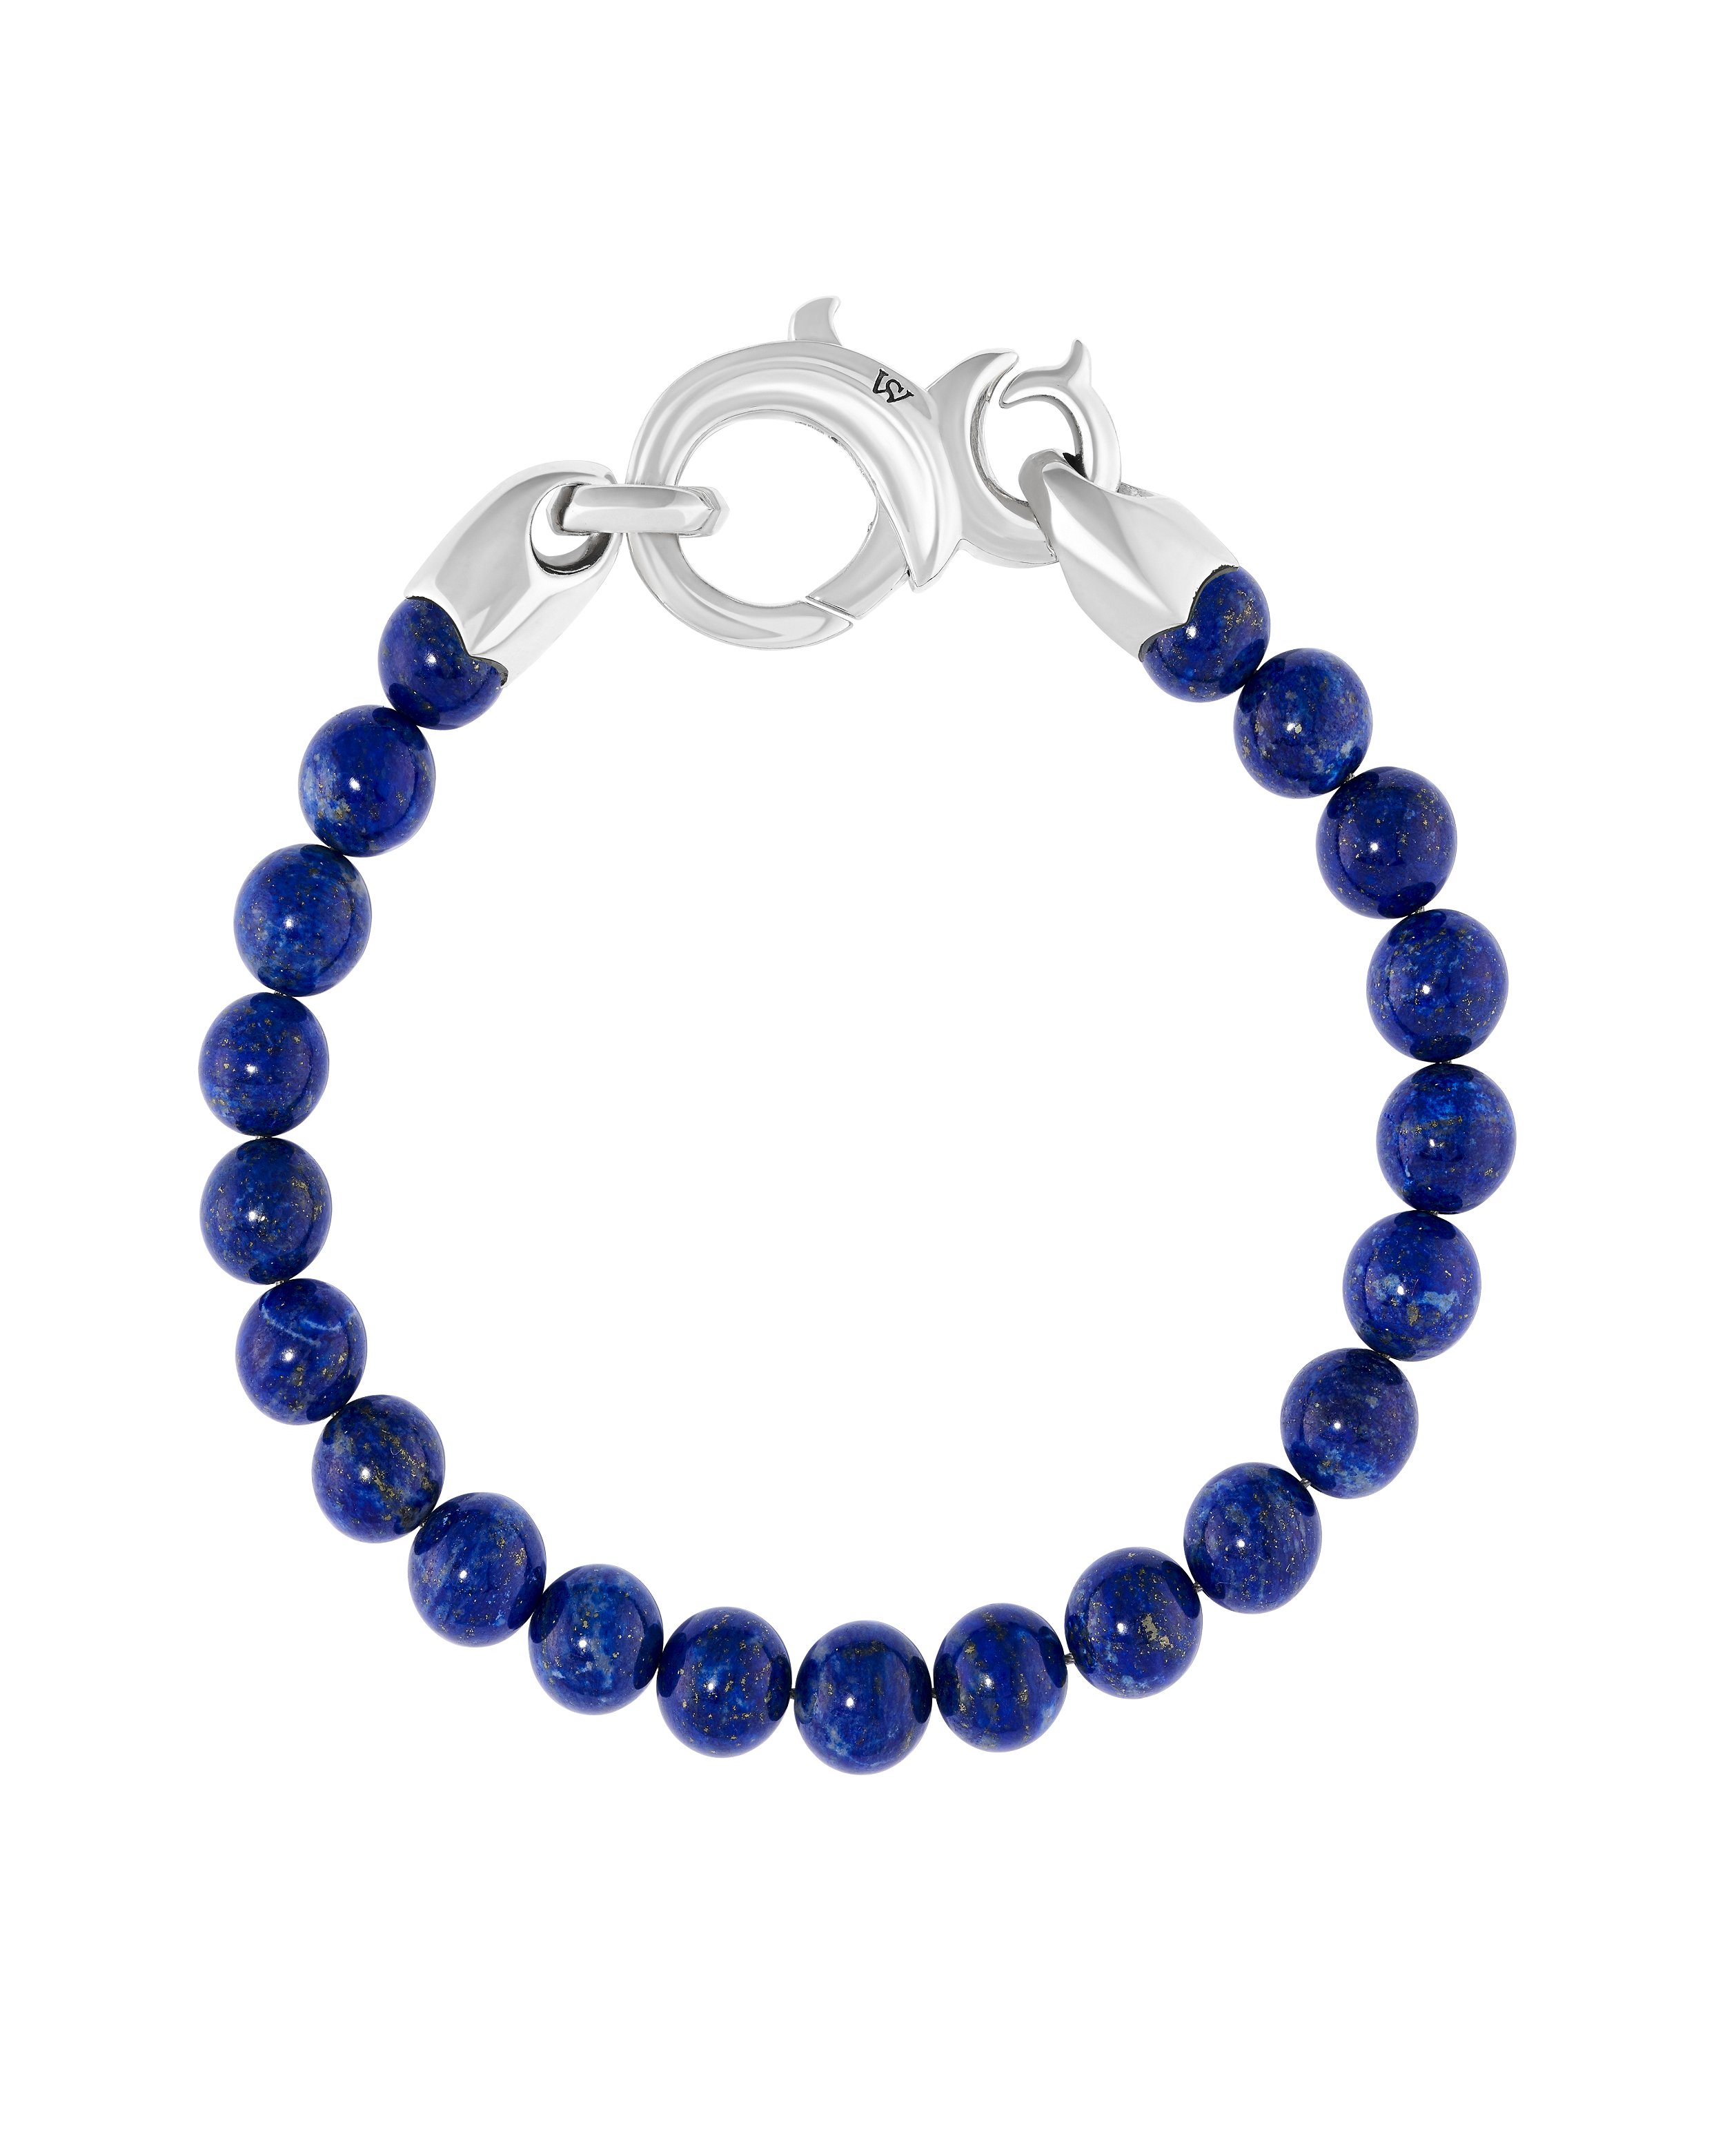 Thorn Addiction Bead Bracelet with Lapis in Sterling Silver - 8.5" Long